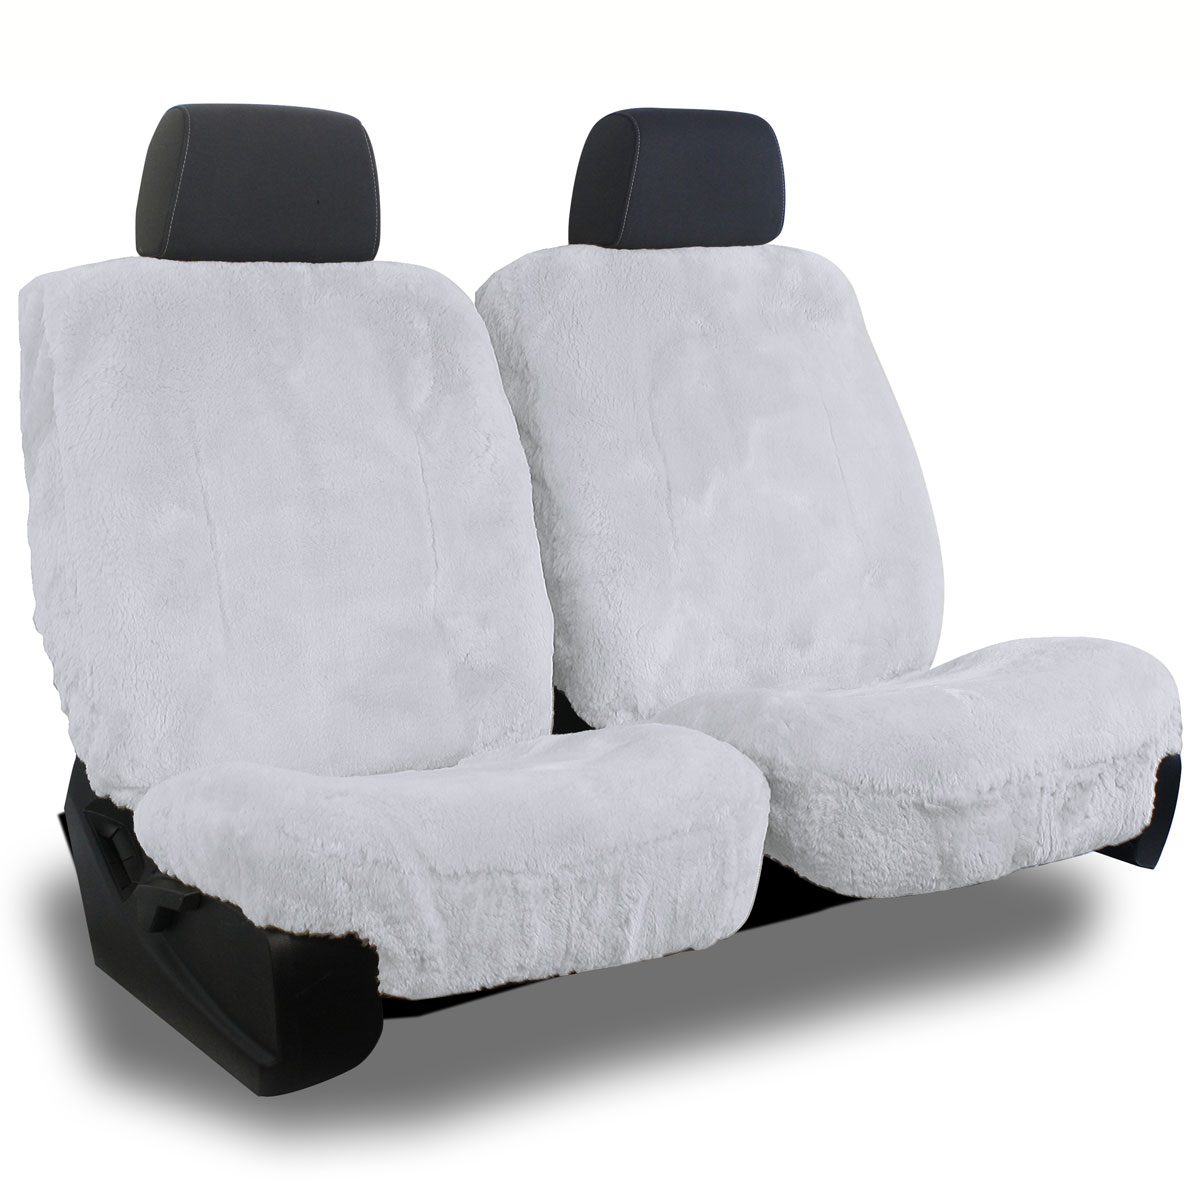 NEW! Shearling Back Seat Protector with Headrest-Natural